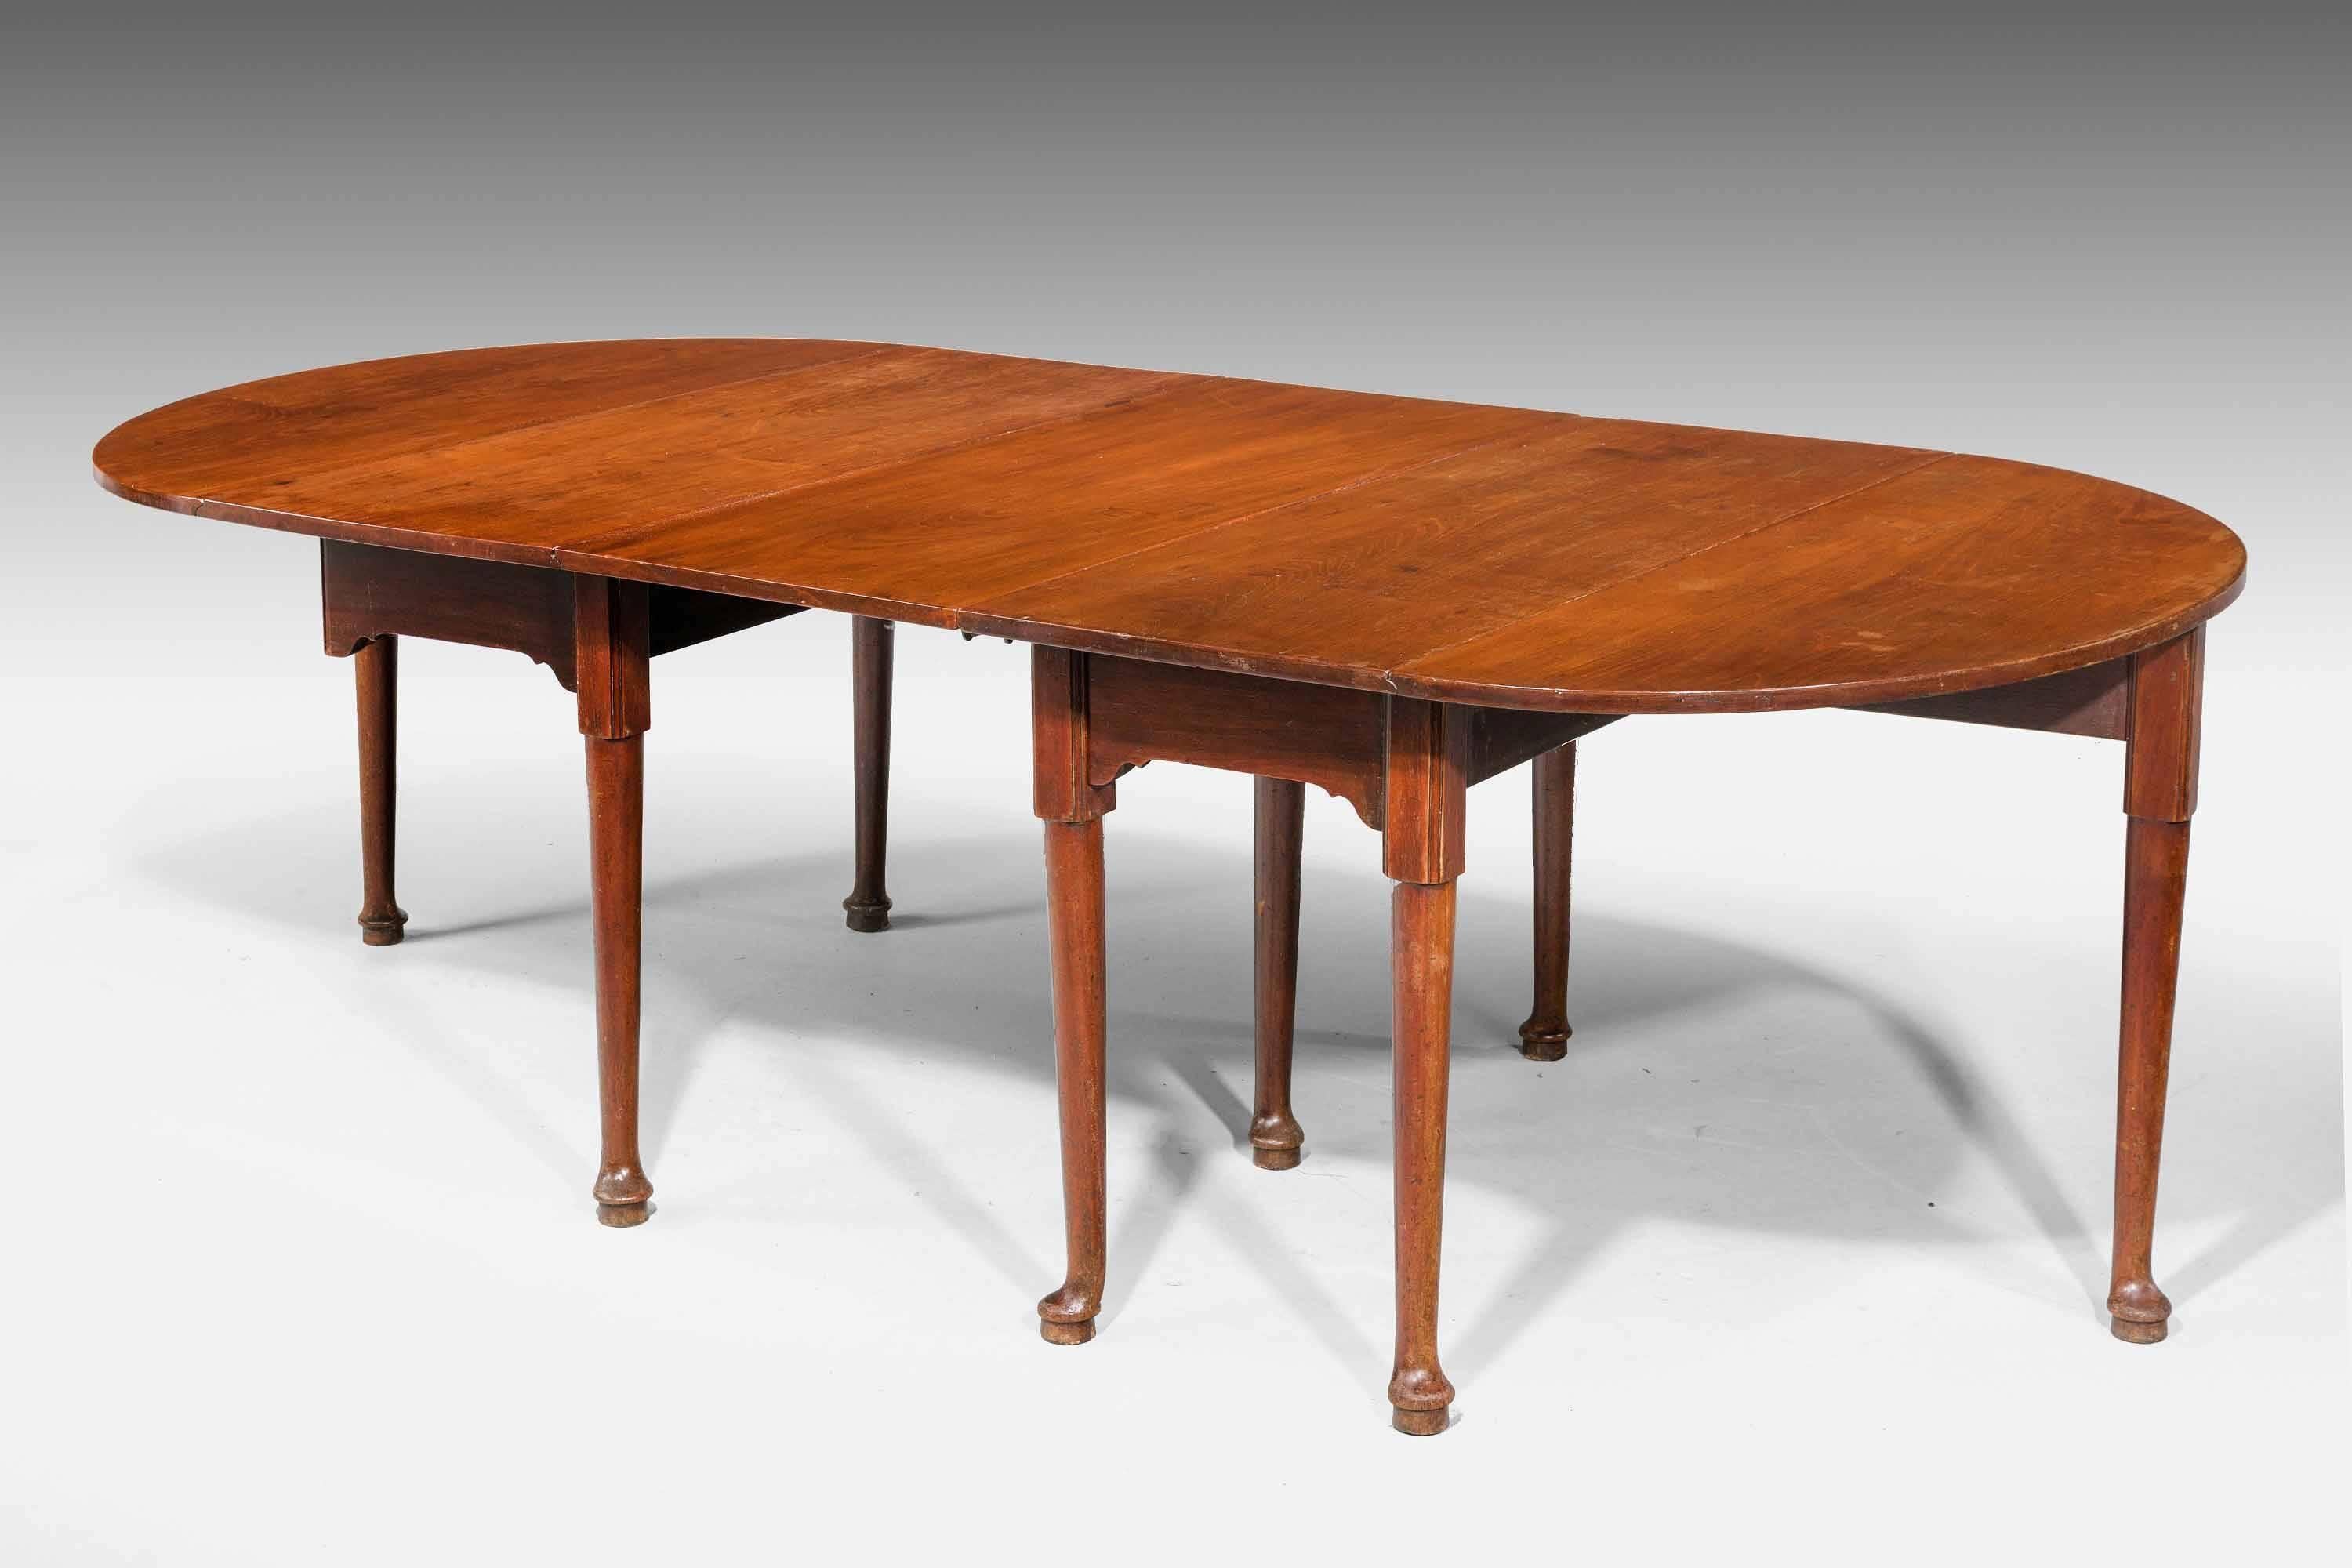 English Early George III Period Mahogany Dining Table